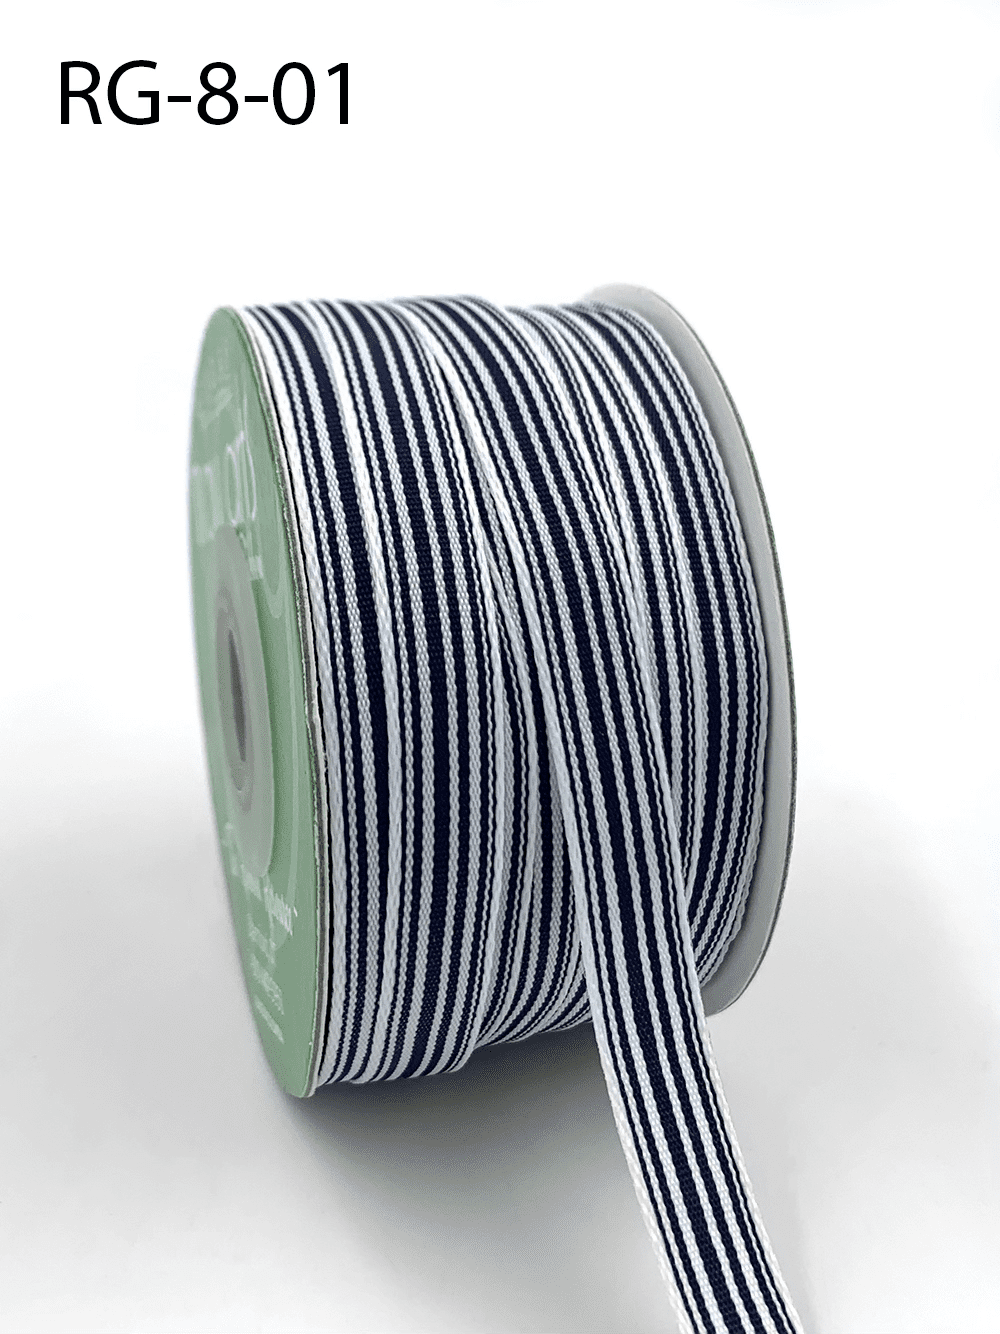 1-3/8 Red/White/Blue Striped Grosgrain Ribbon - 100 Yards - USA Made -  (Multiple Widths & Yardages Available)